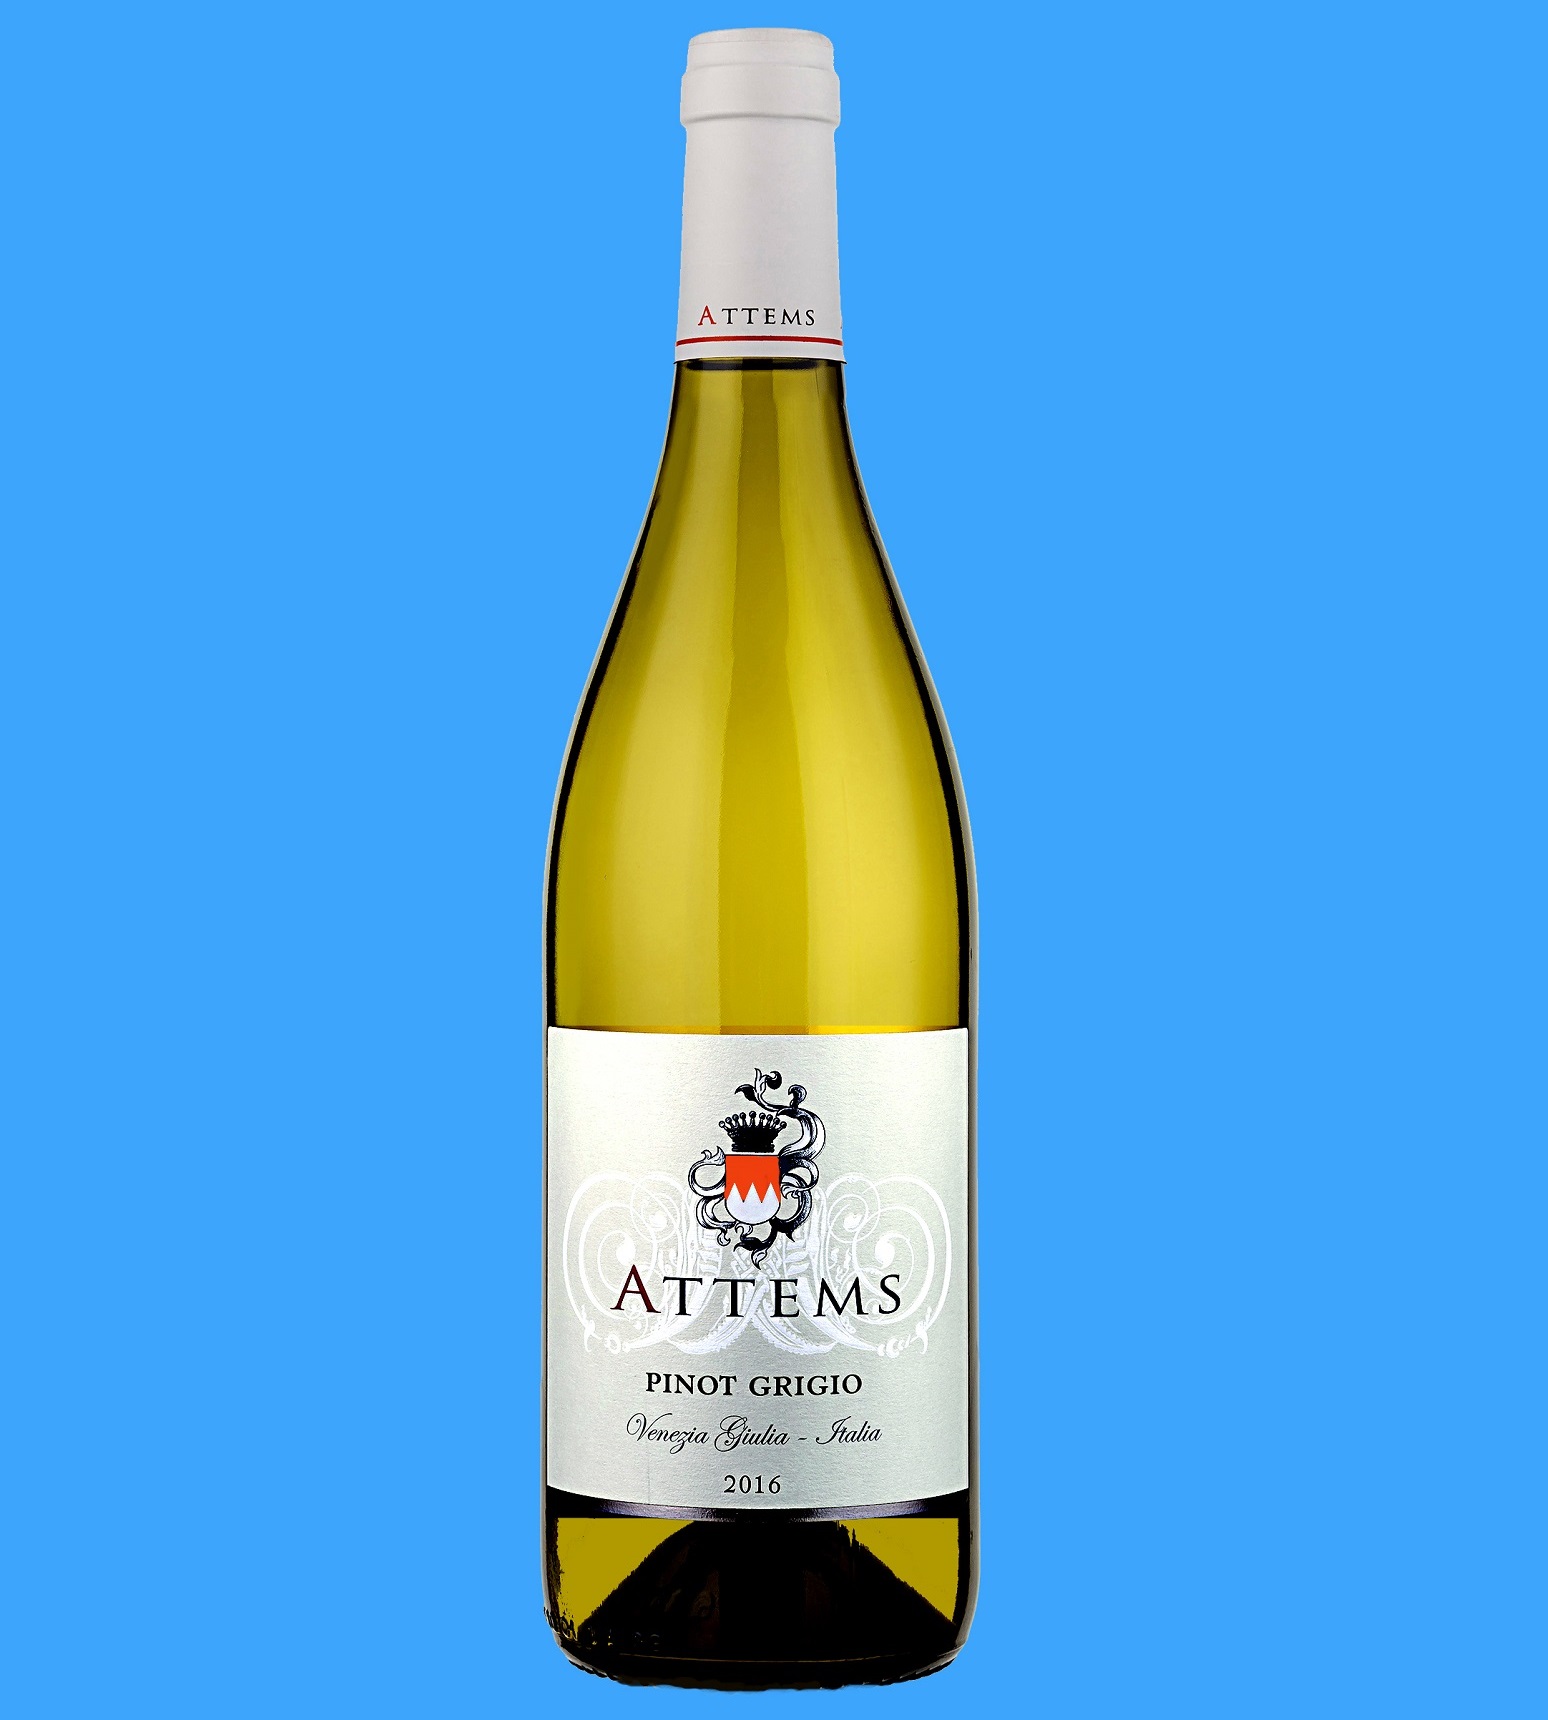 roger attems pinot grigio bouteille